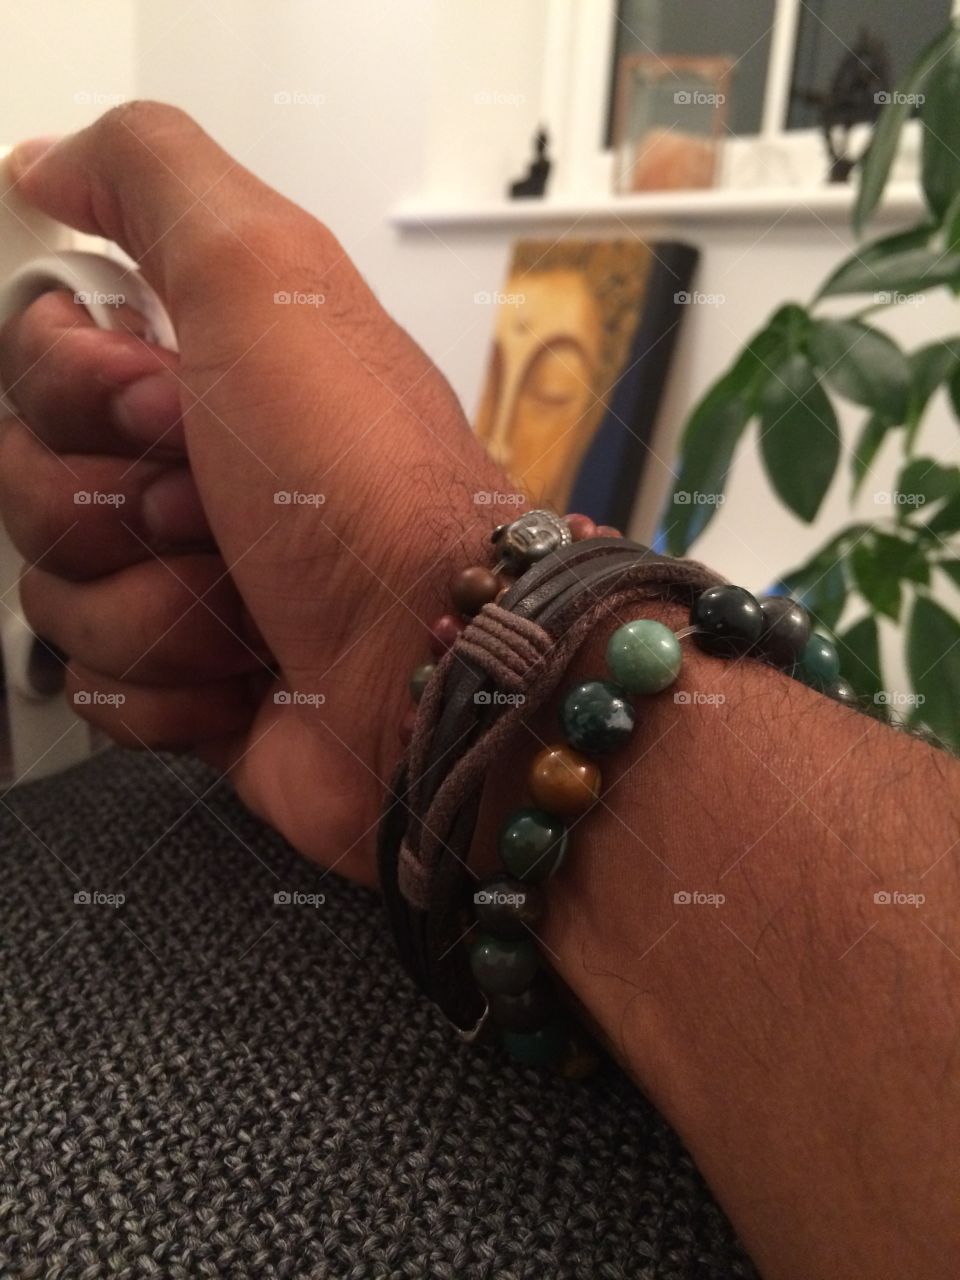 Enjoying the fruits of my labour making these ethnic gemstone beads 
with a nice cup of tea. 